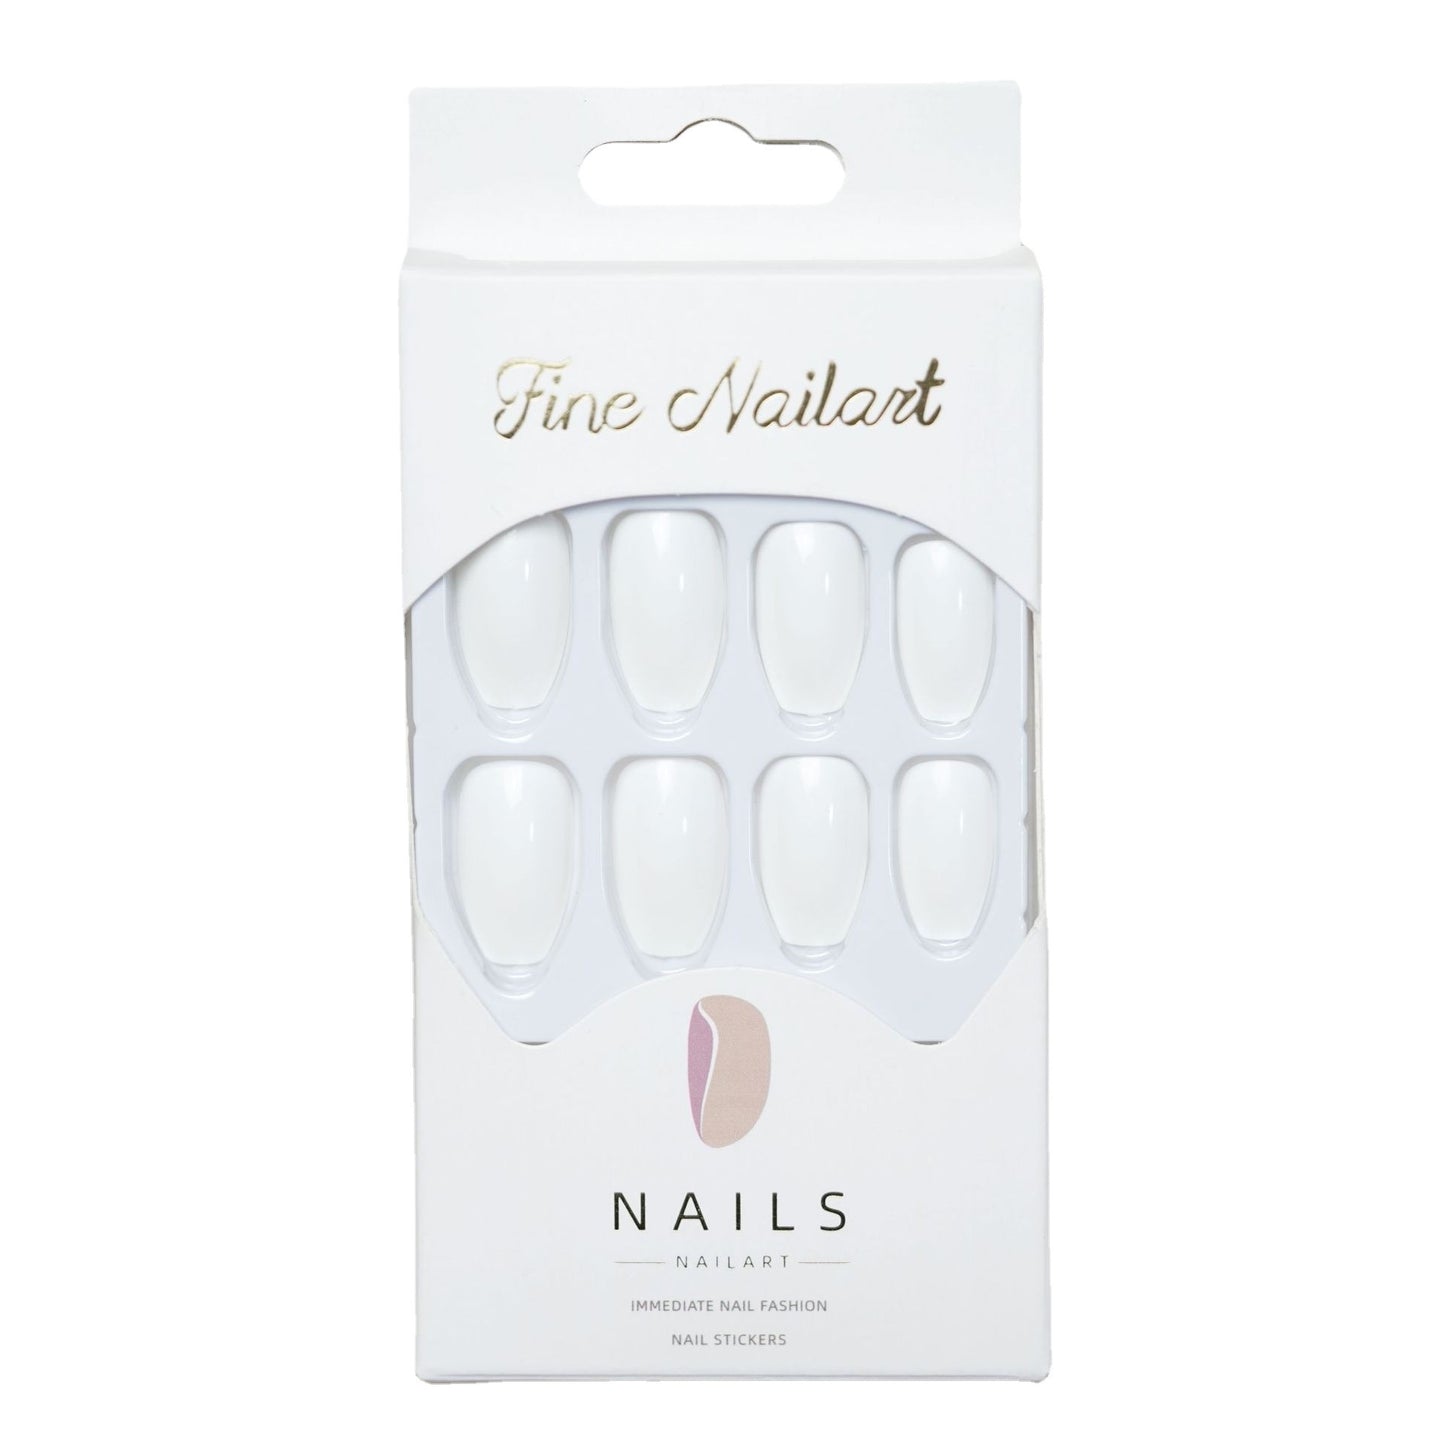 Ballet Bright White Fake Nail Tip Wear Finished Product